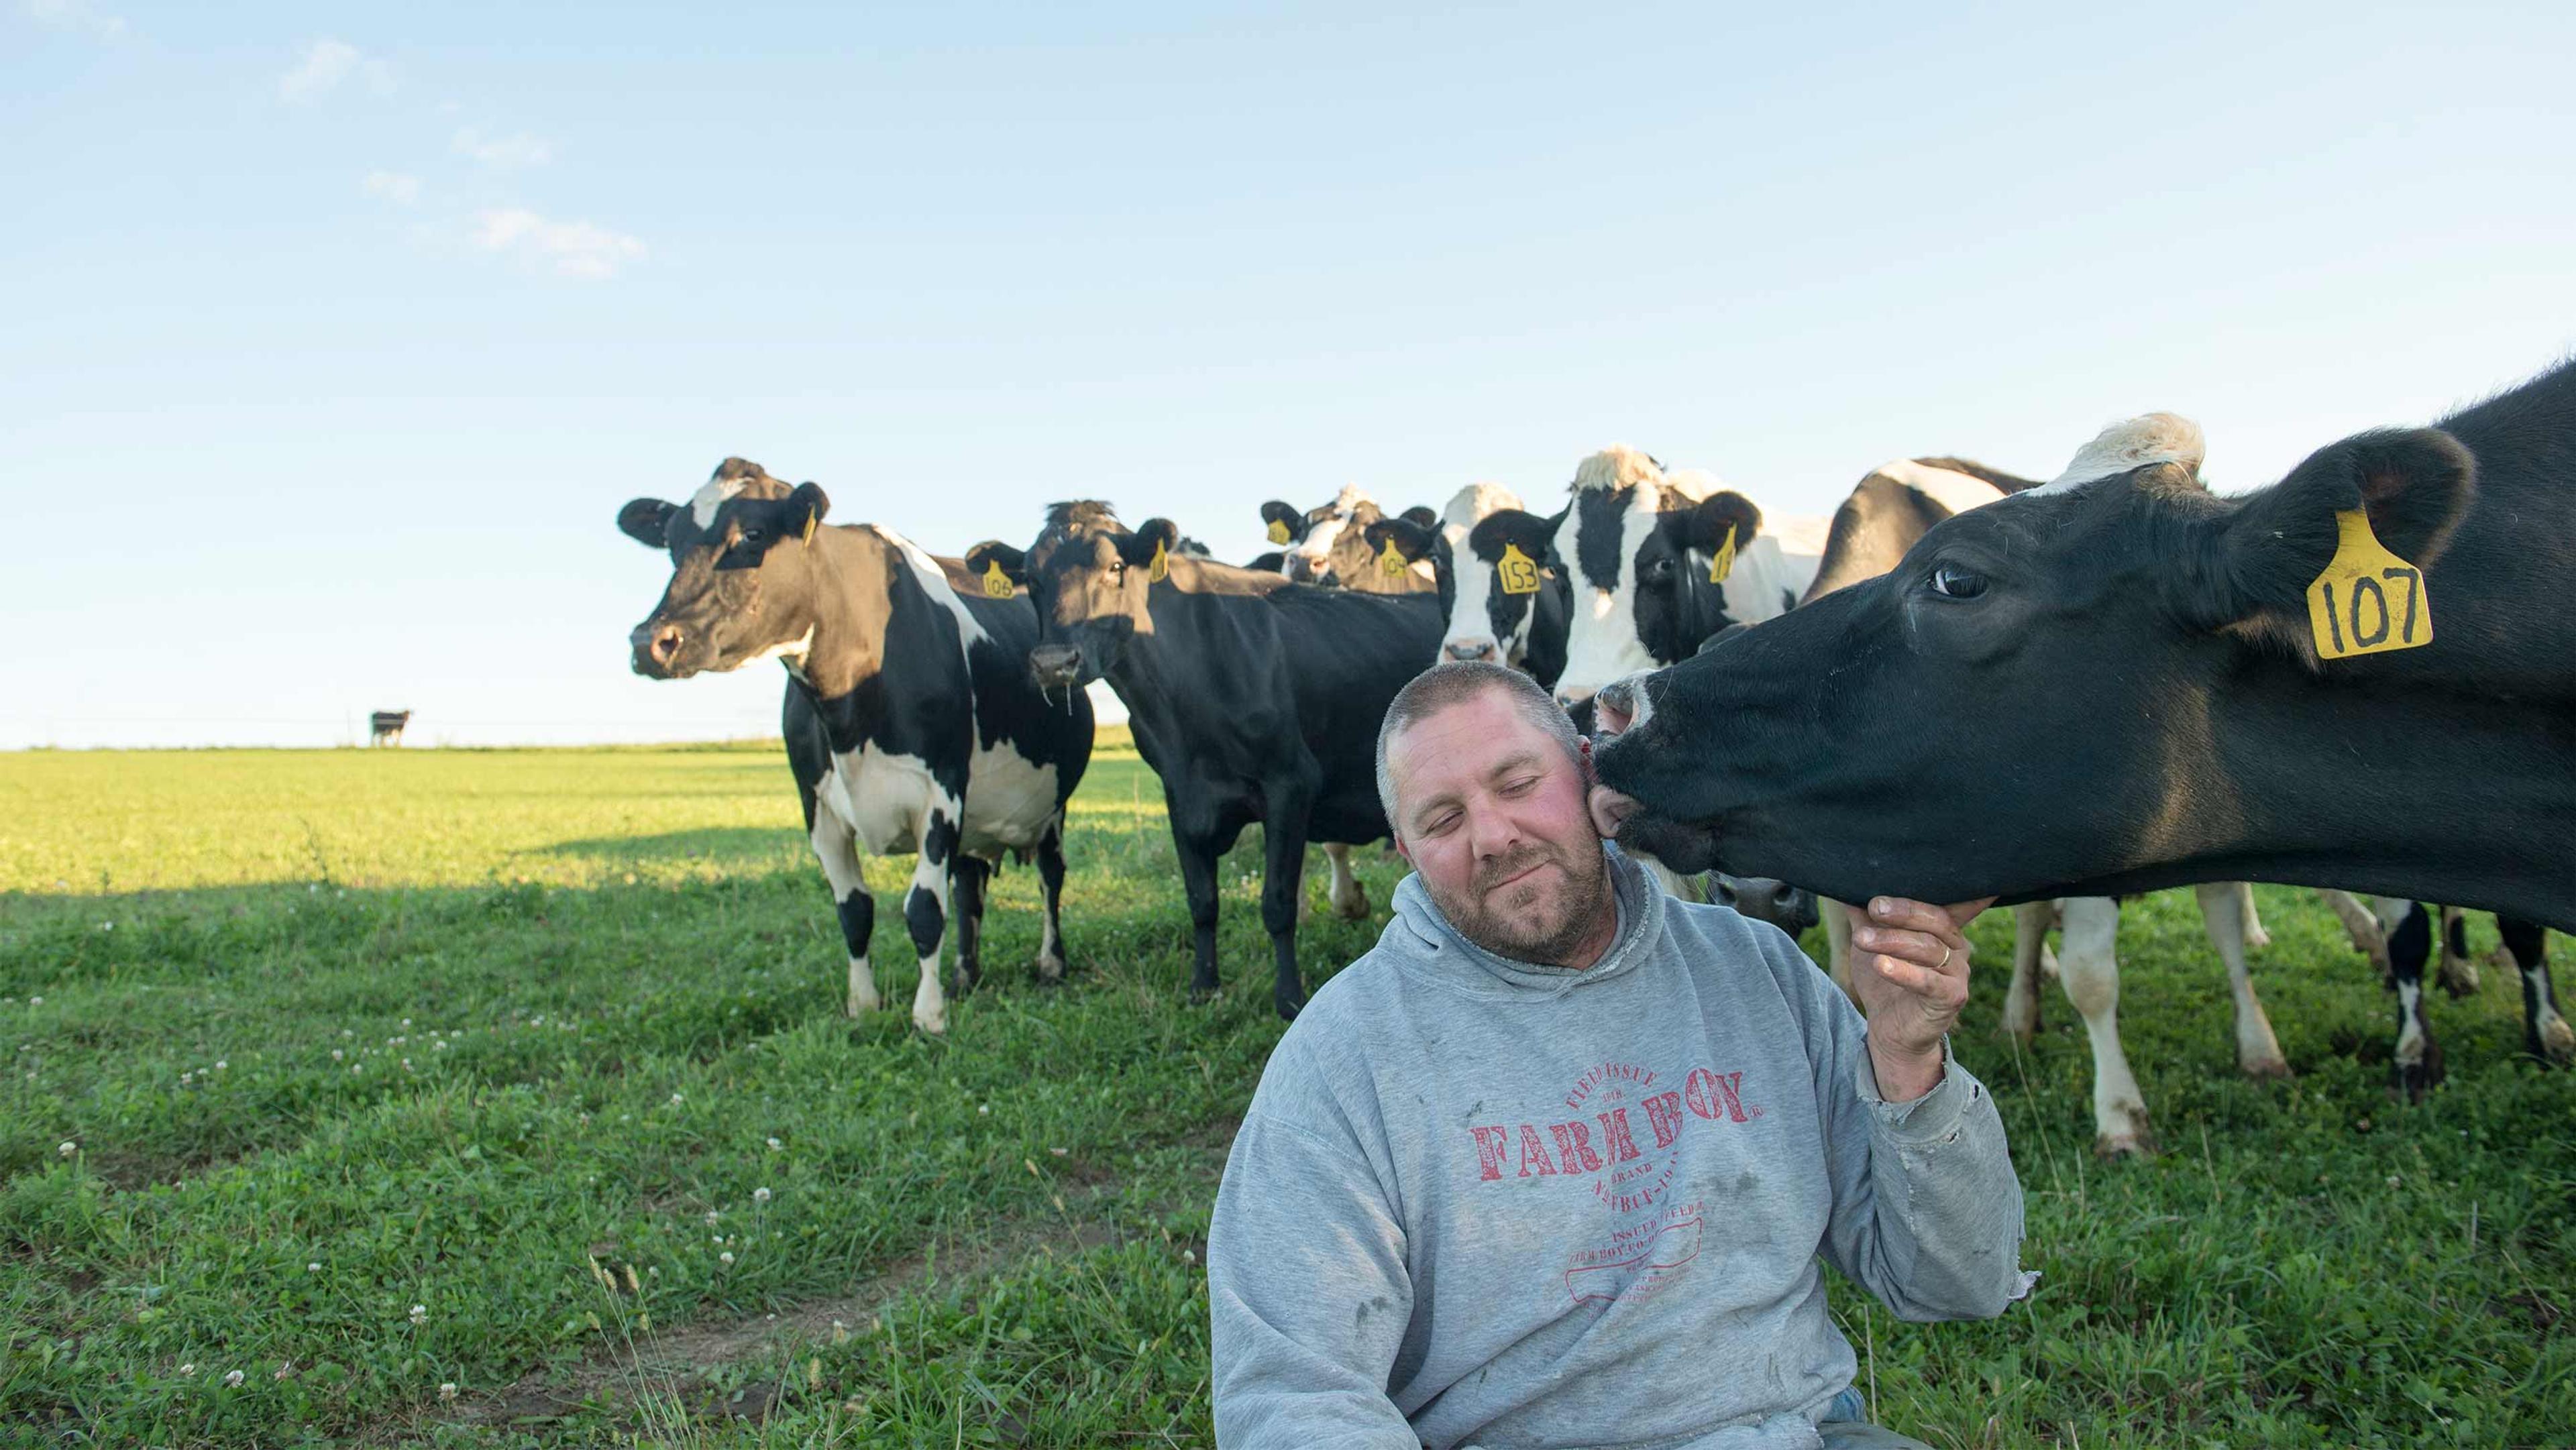 Tony O'Reilly sitting in the grass as a cow licks his face with a herd of cows in the background.